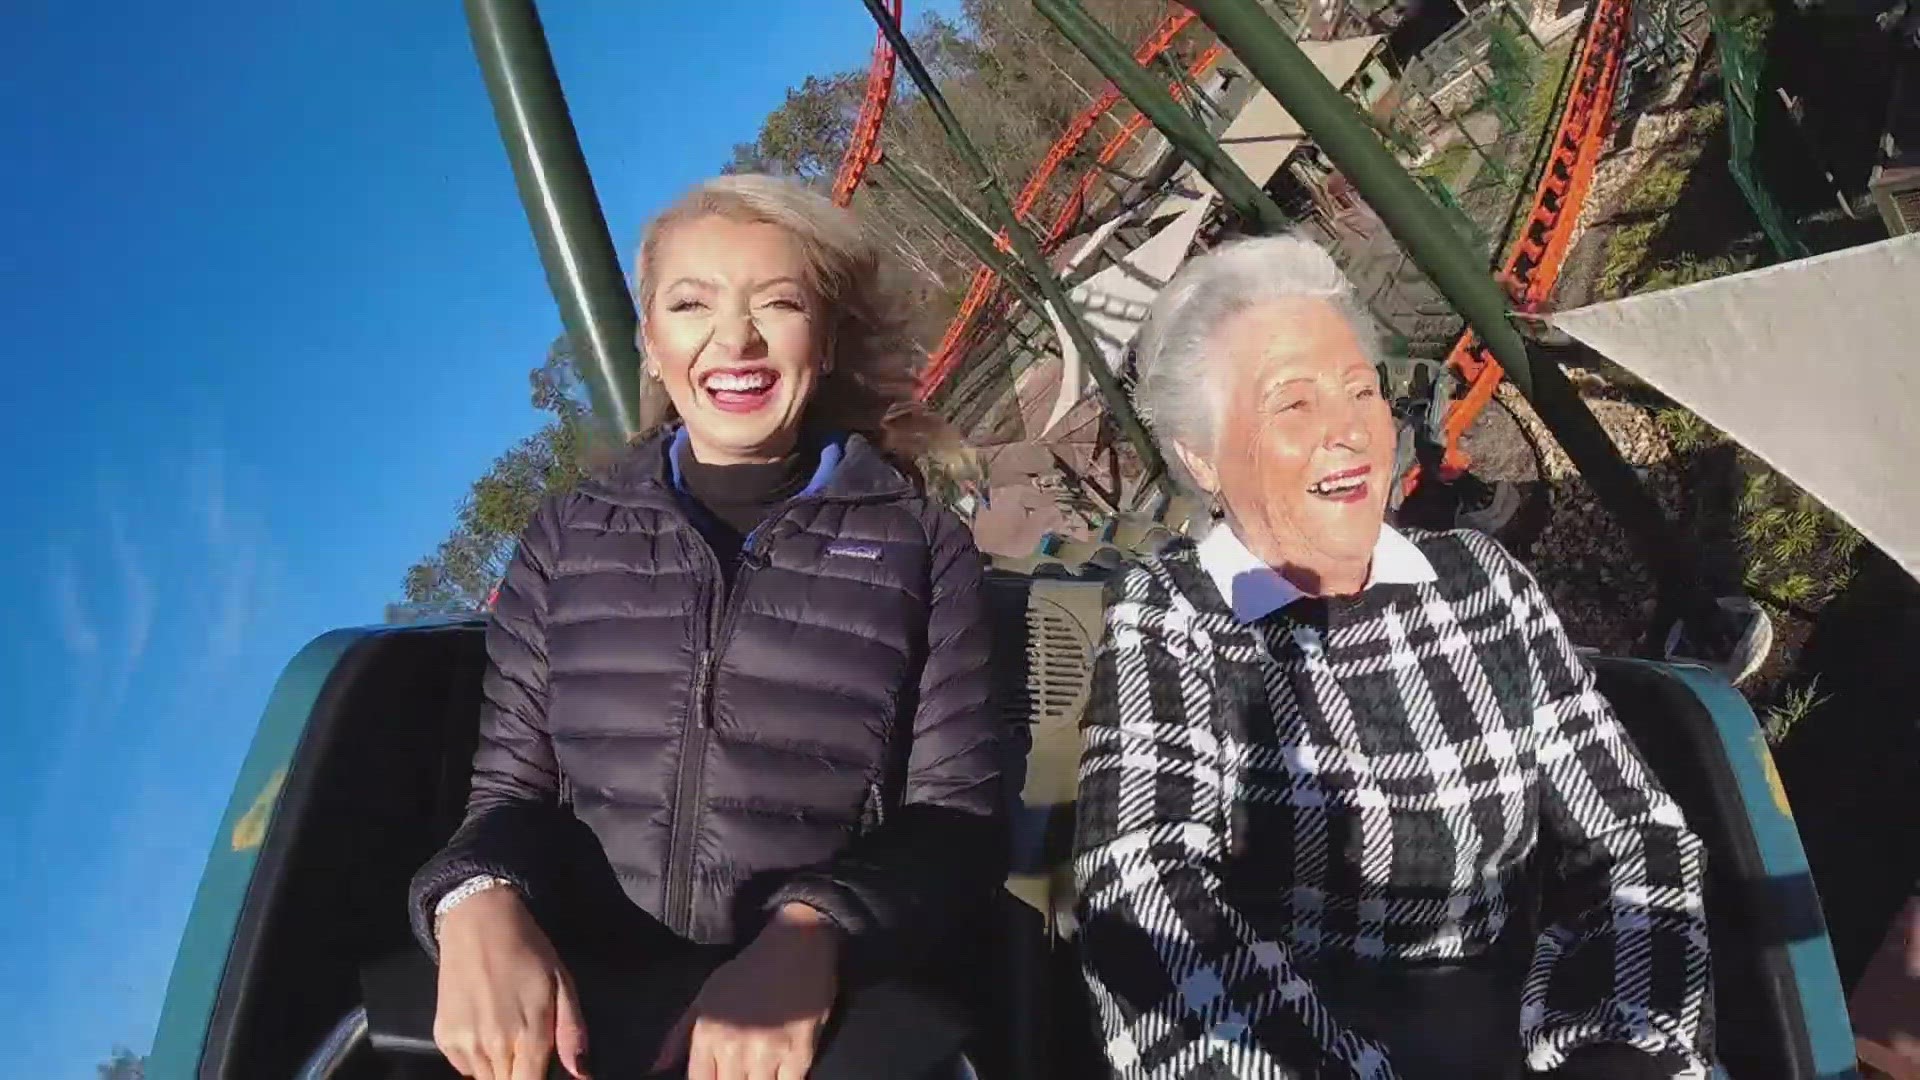 A Knoxville grandmother is proving that your age shouldn't stop you from doing what you love.